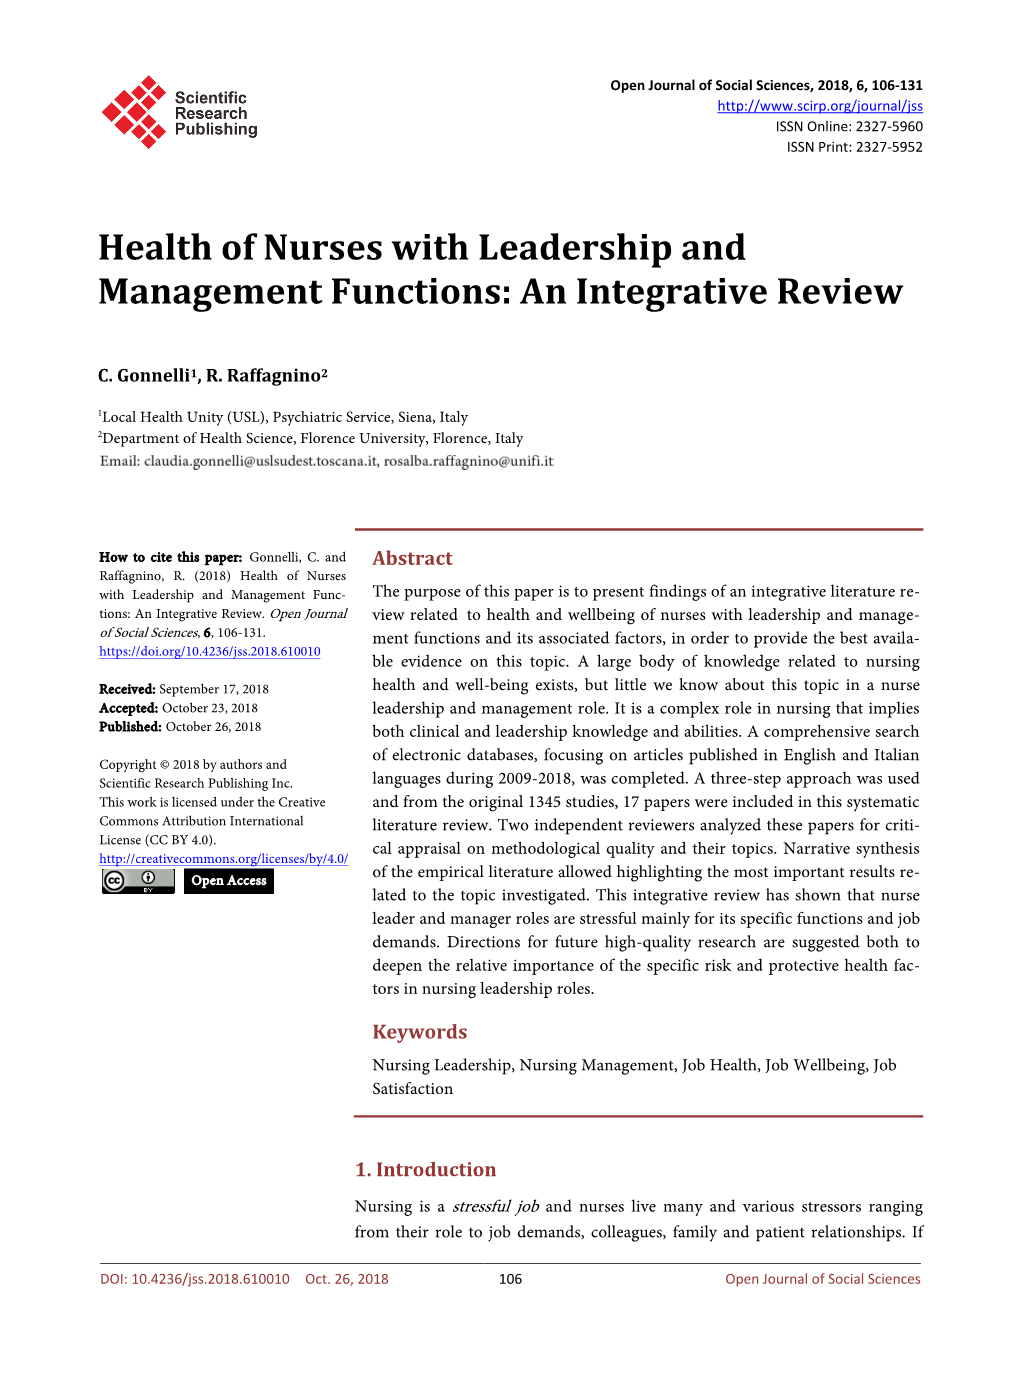 Health of Nurses with Leadership and Management Functions: an Integrative Review